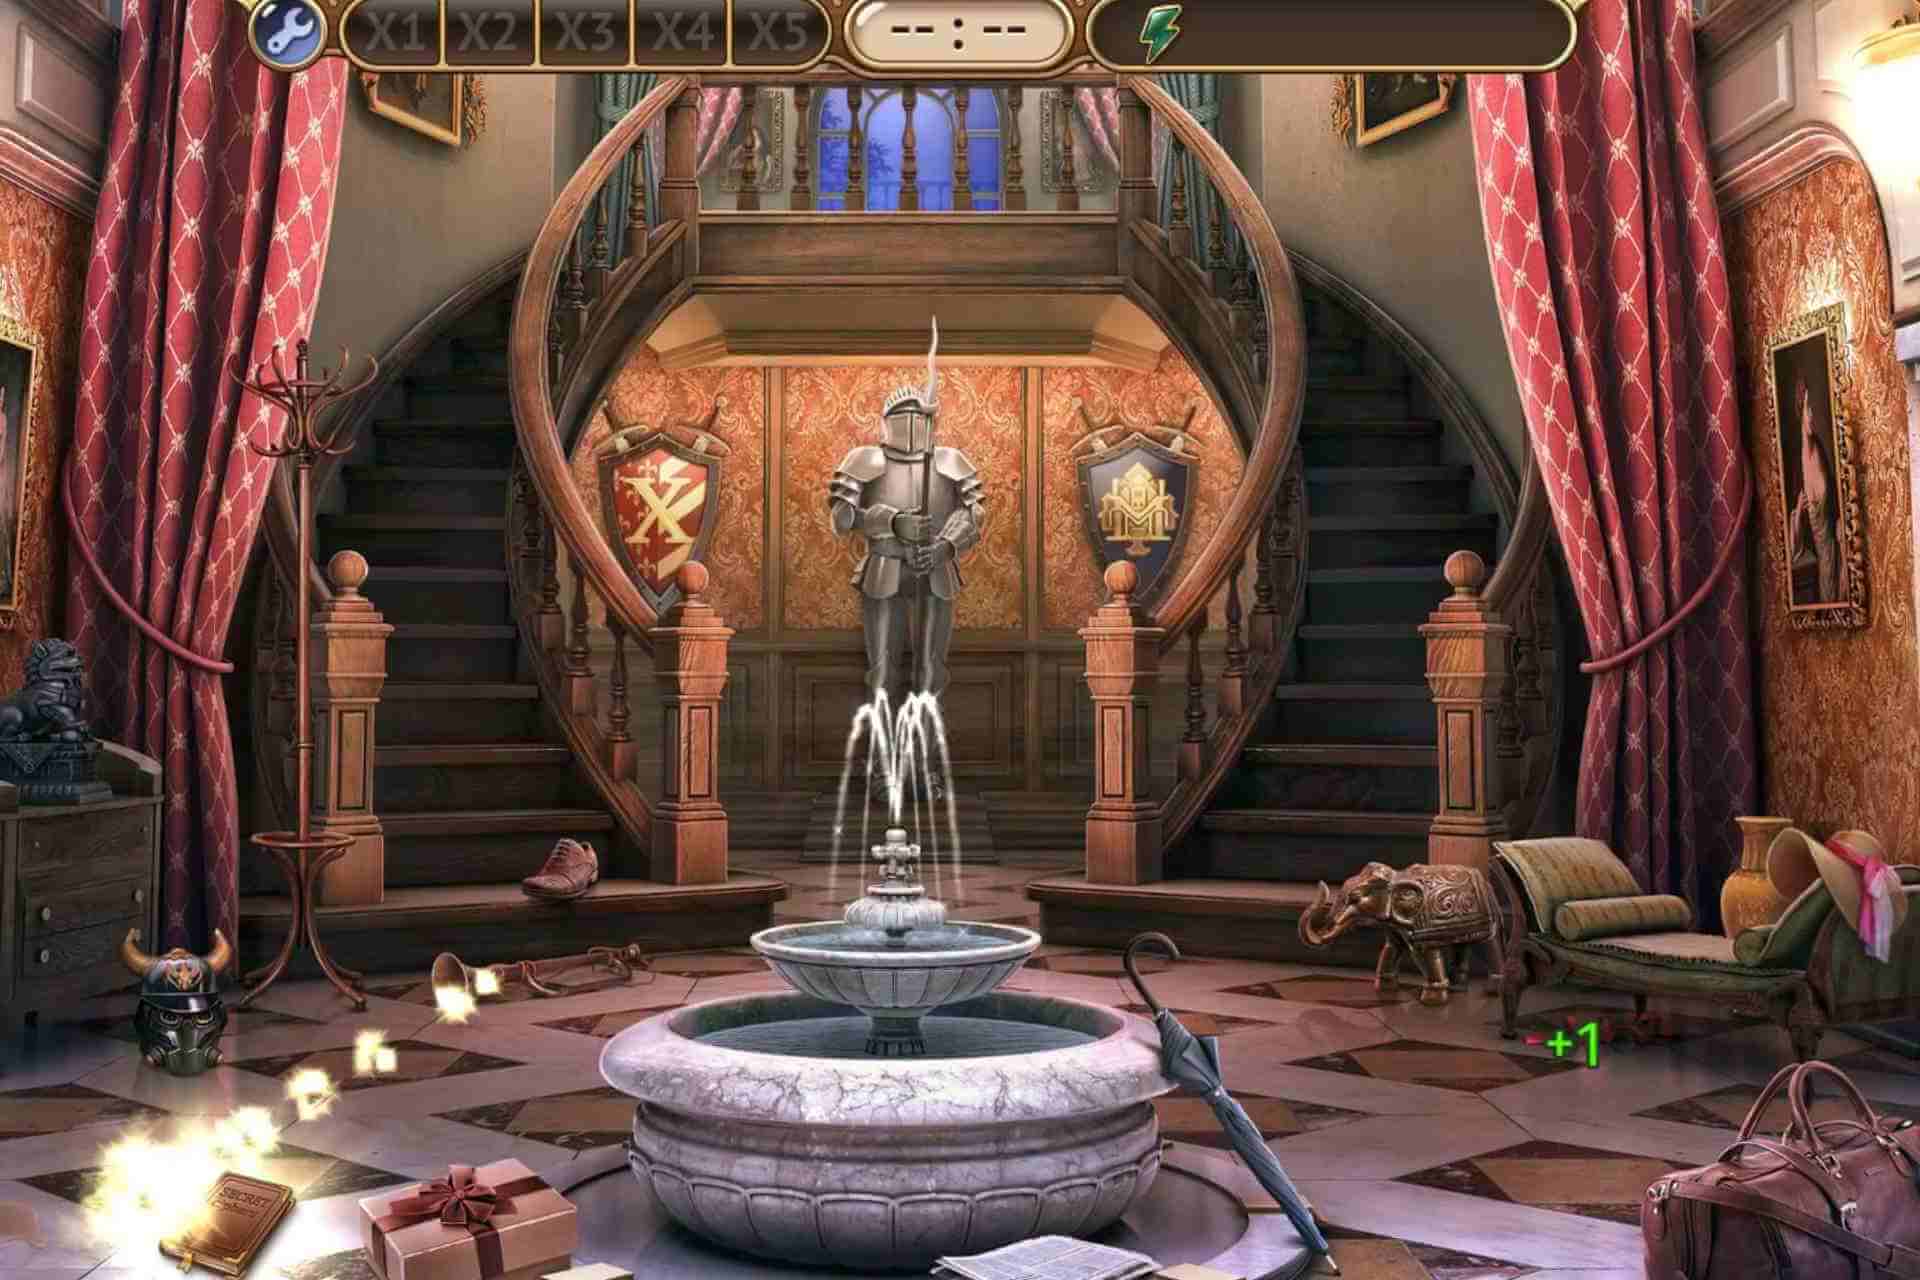 How to Make Hidden Object Game Online?